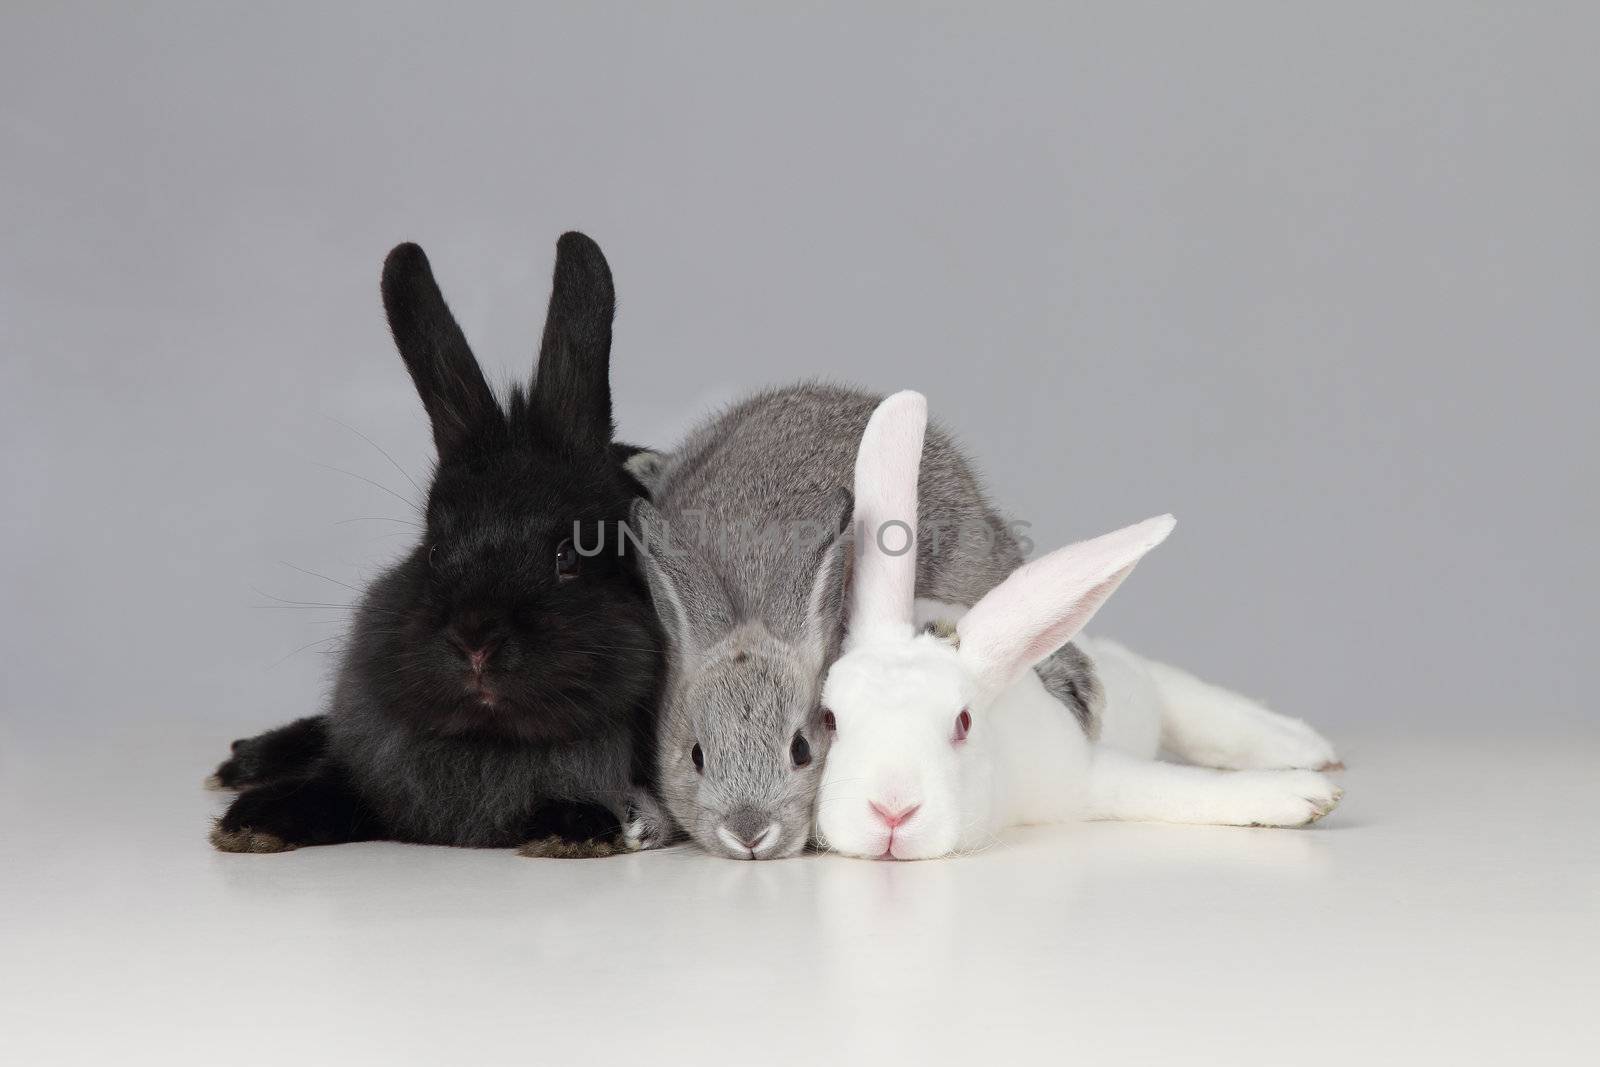 White Black and Gray Bunnies by libyphoto